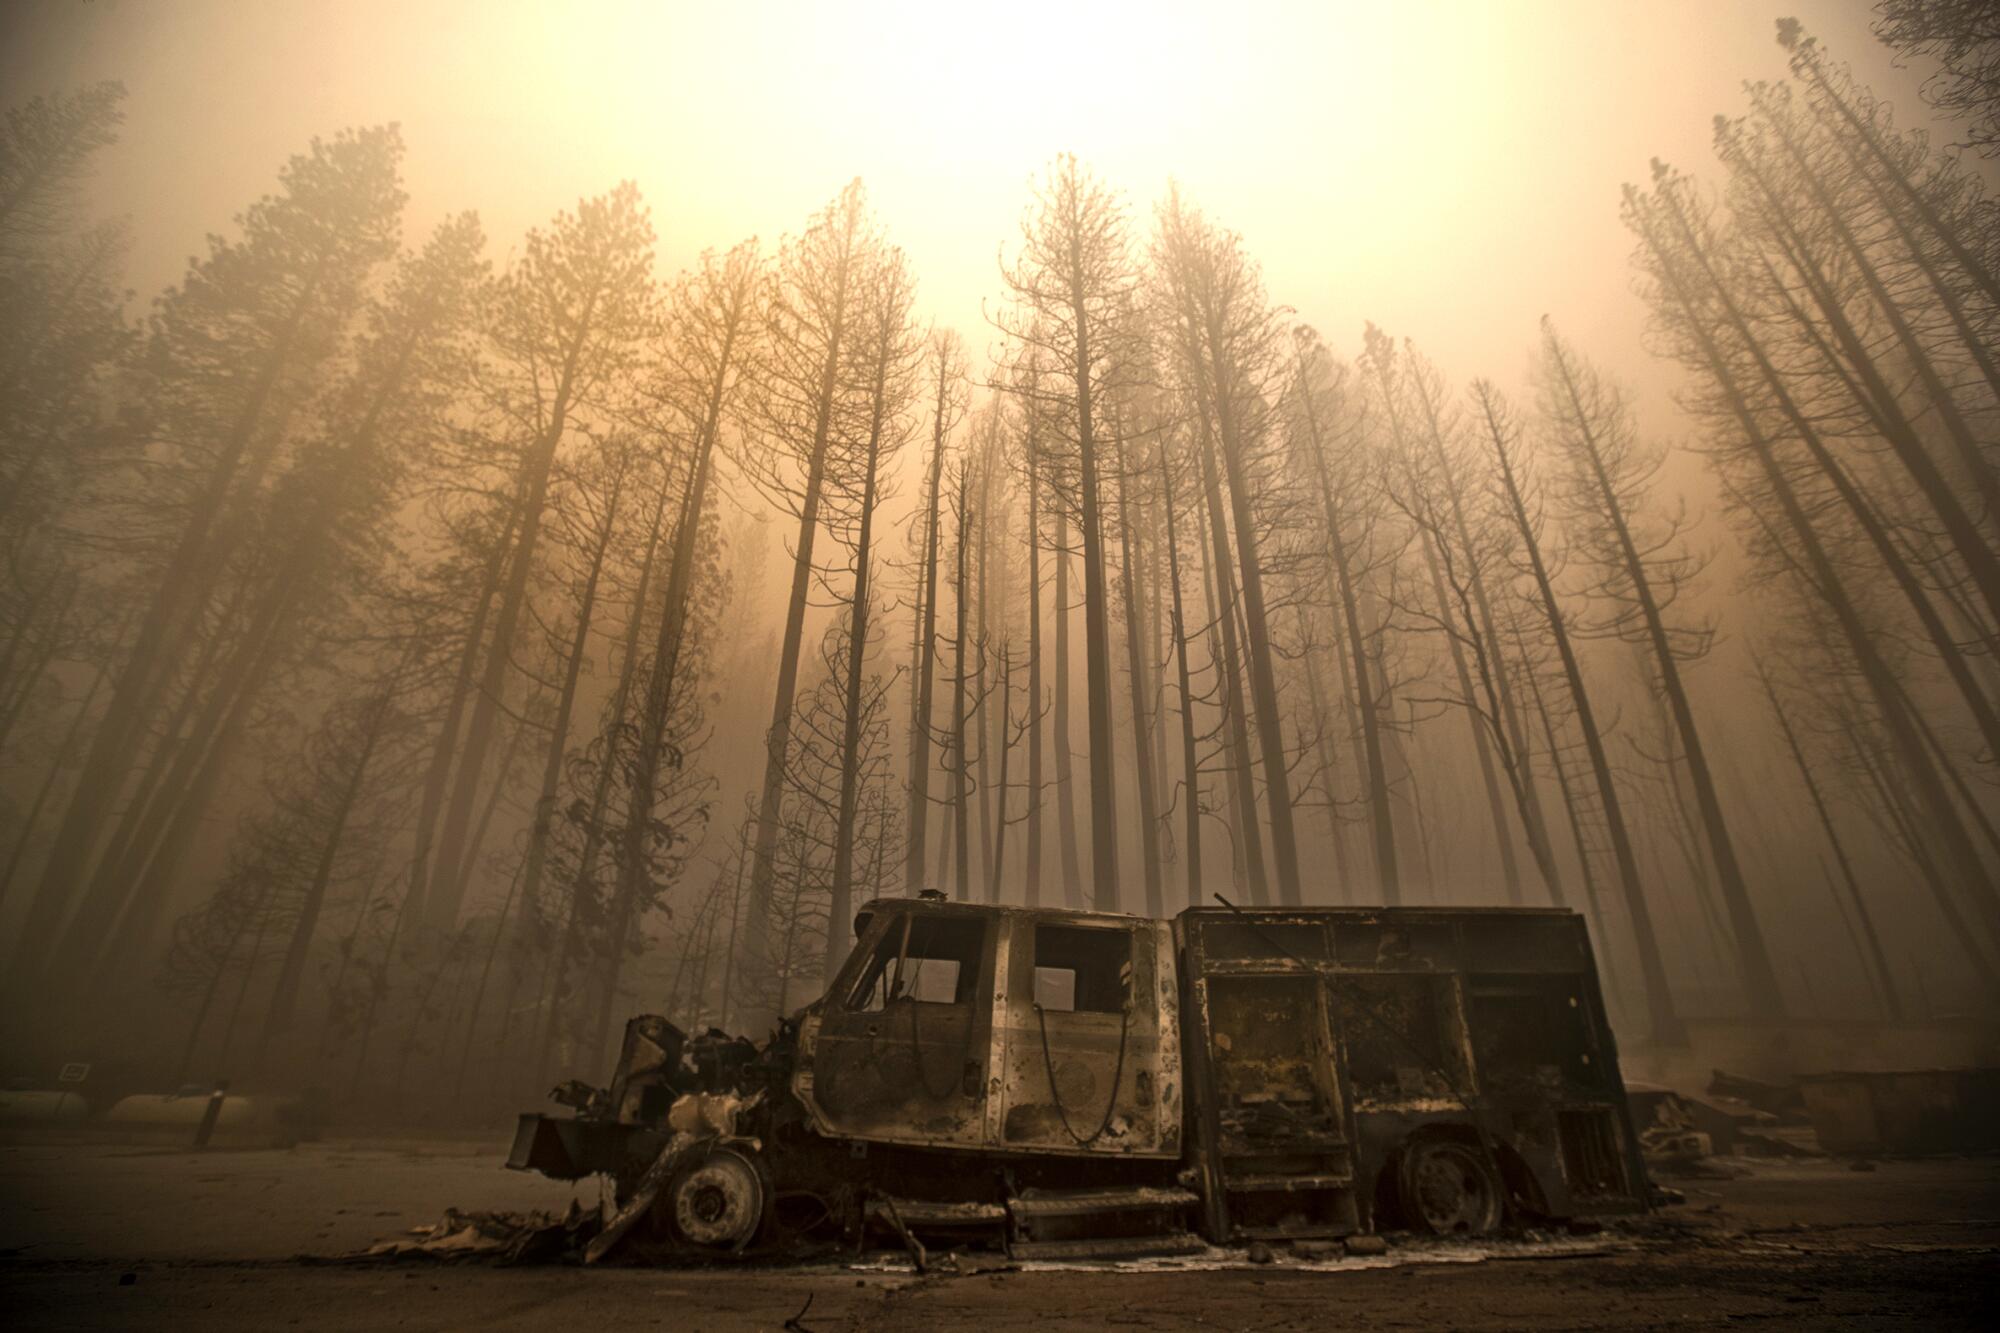  Burned trees rise above a truck destroyed by the Dixie Fire.